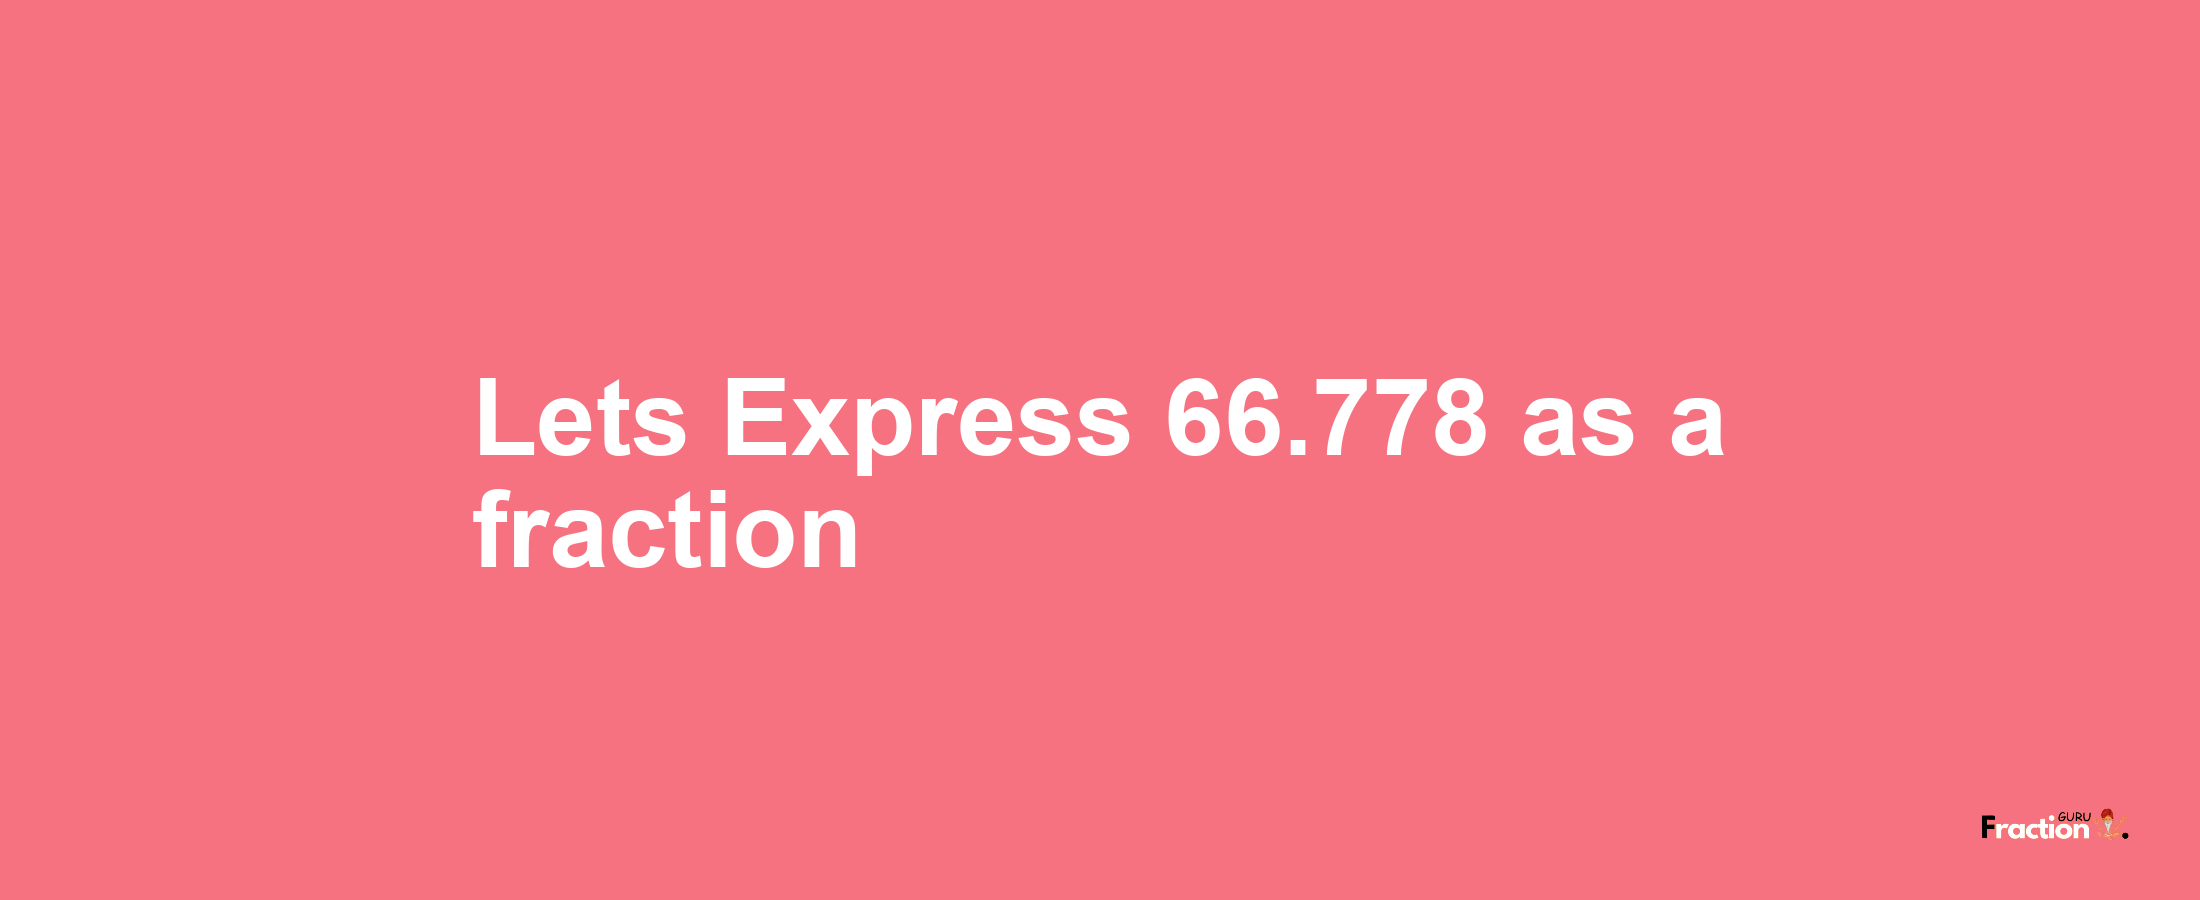 Lets Express 66.778 as afraction